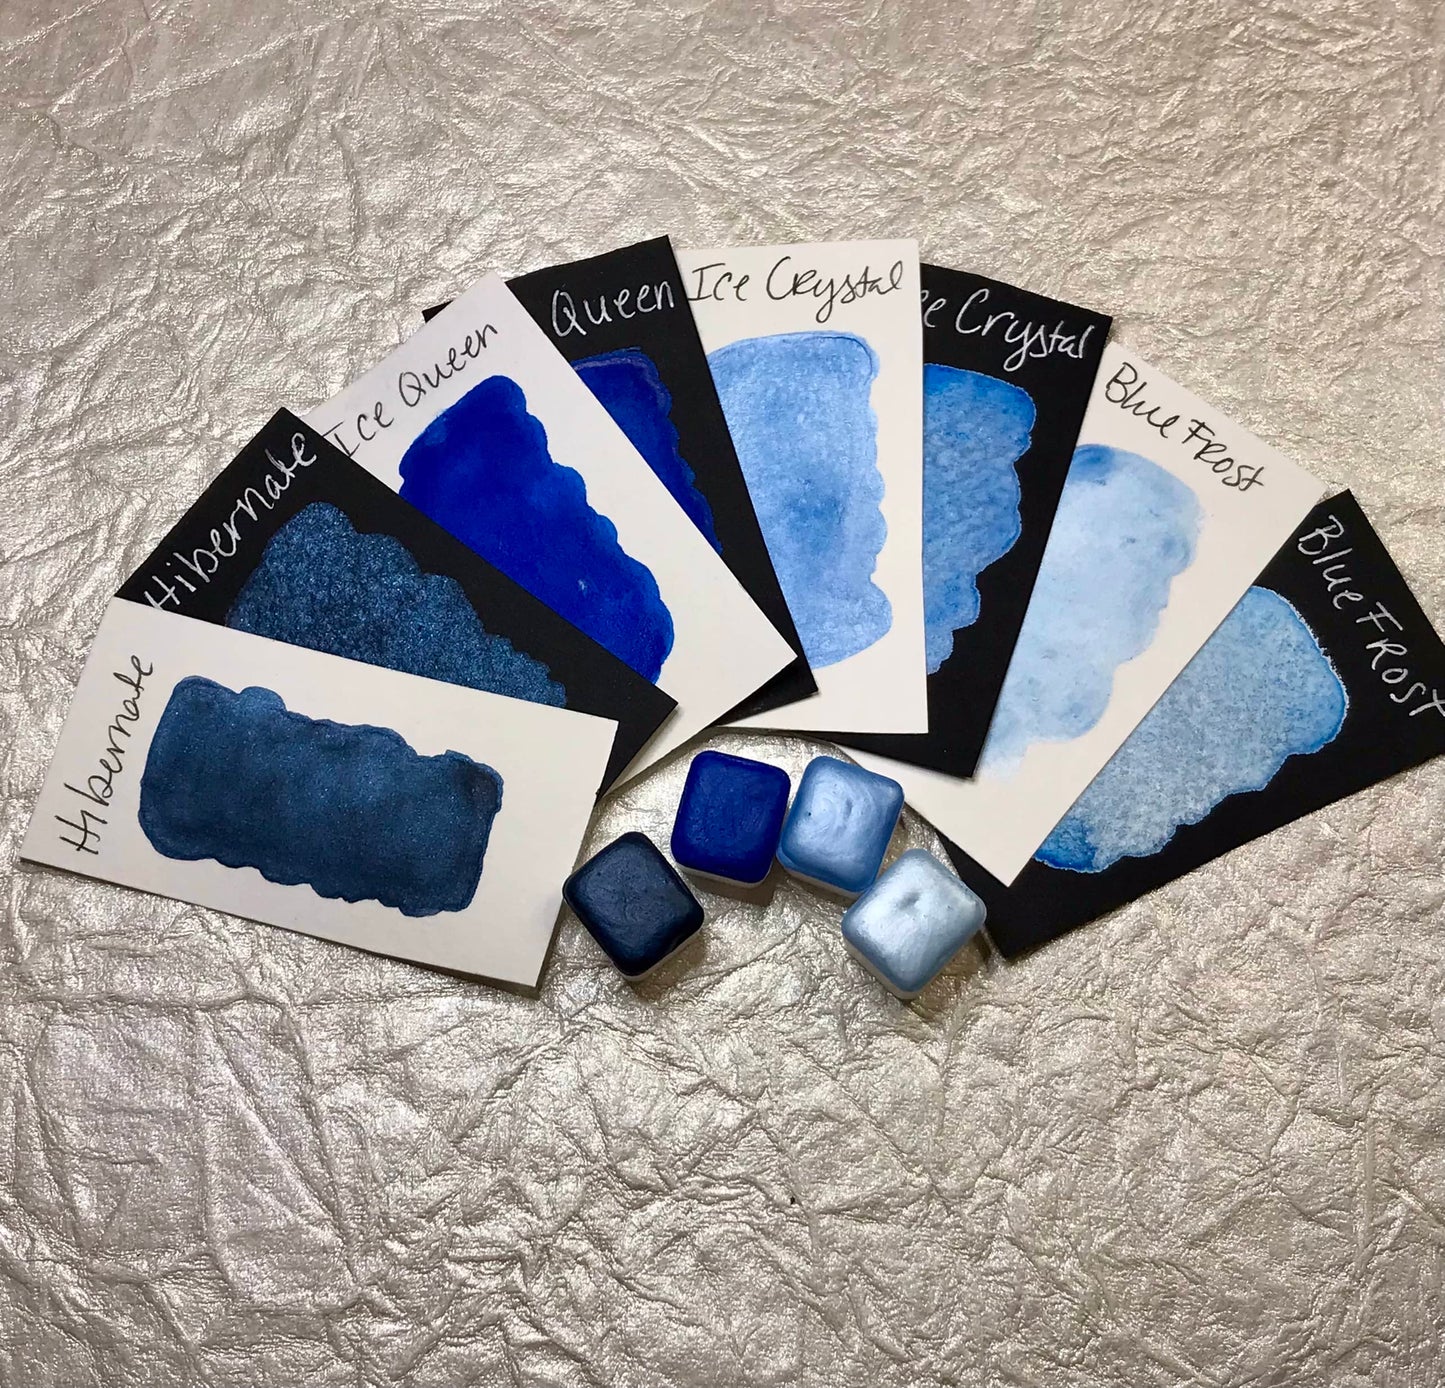 Moody Blues Collection~Handmade Shimmer watercolor paint-half pan